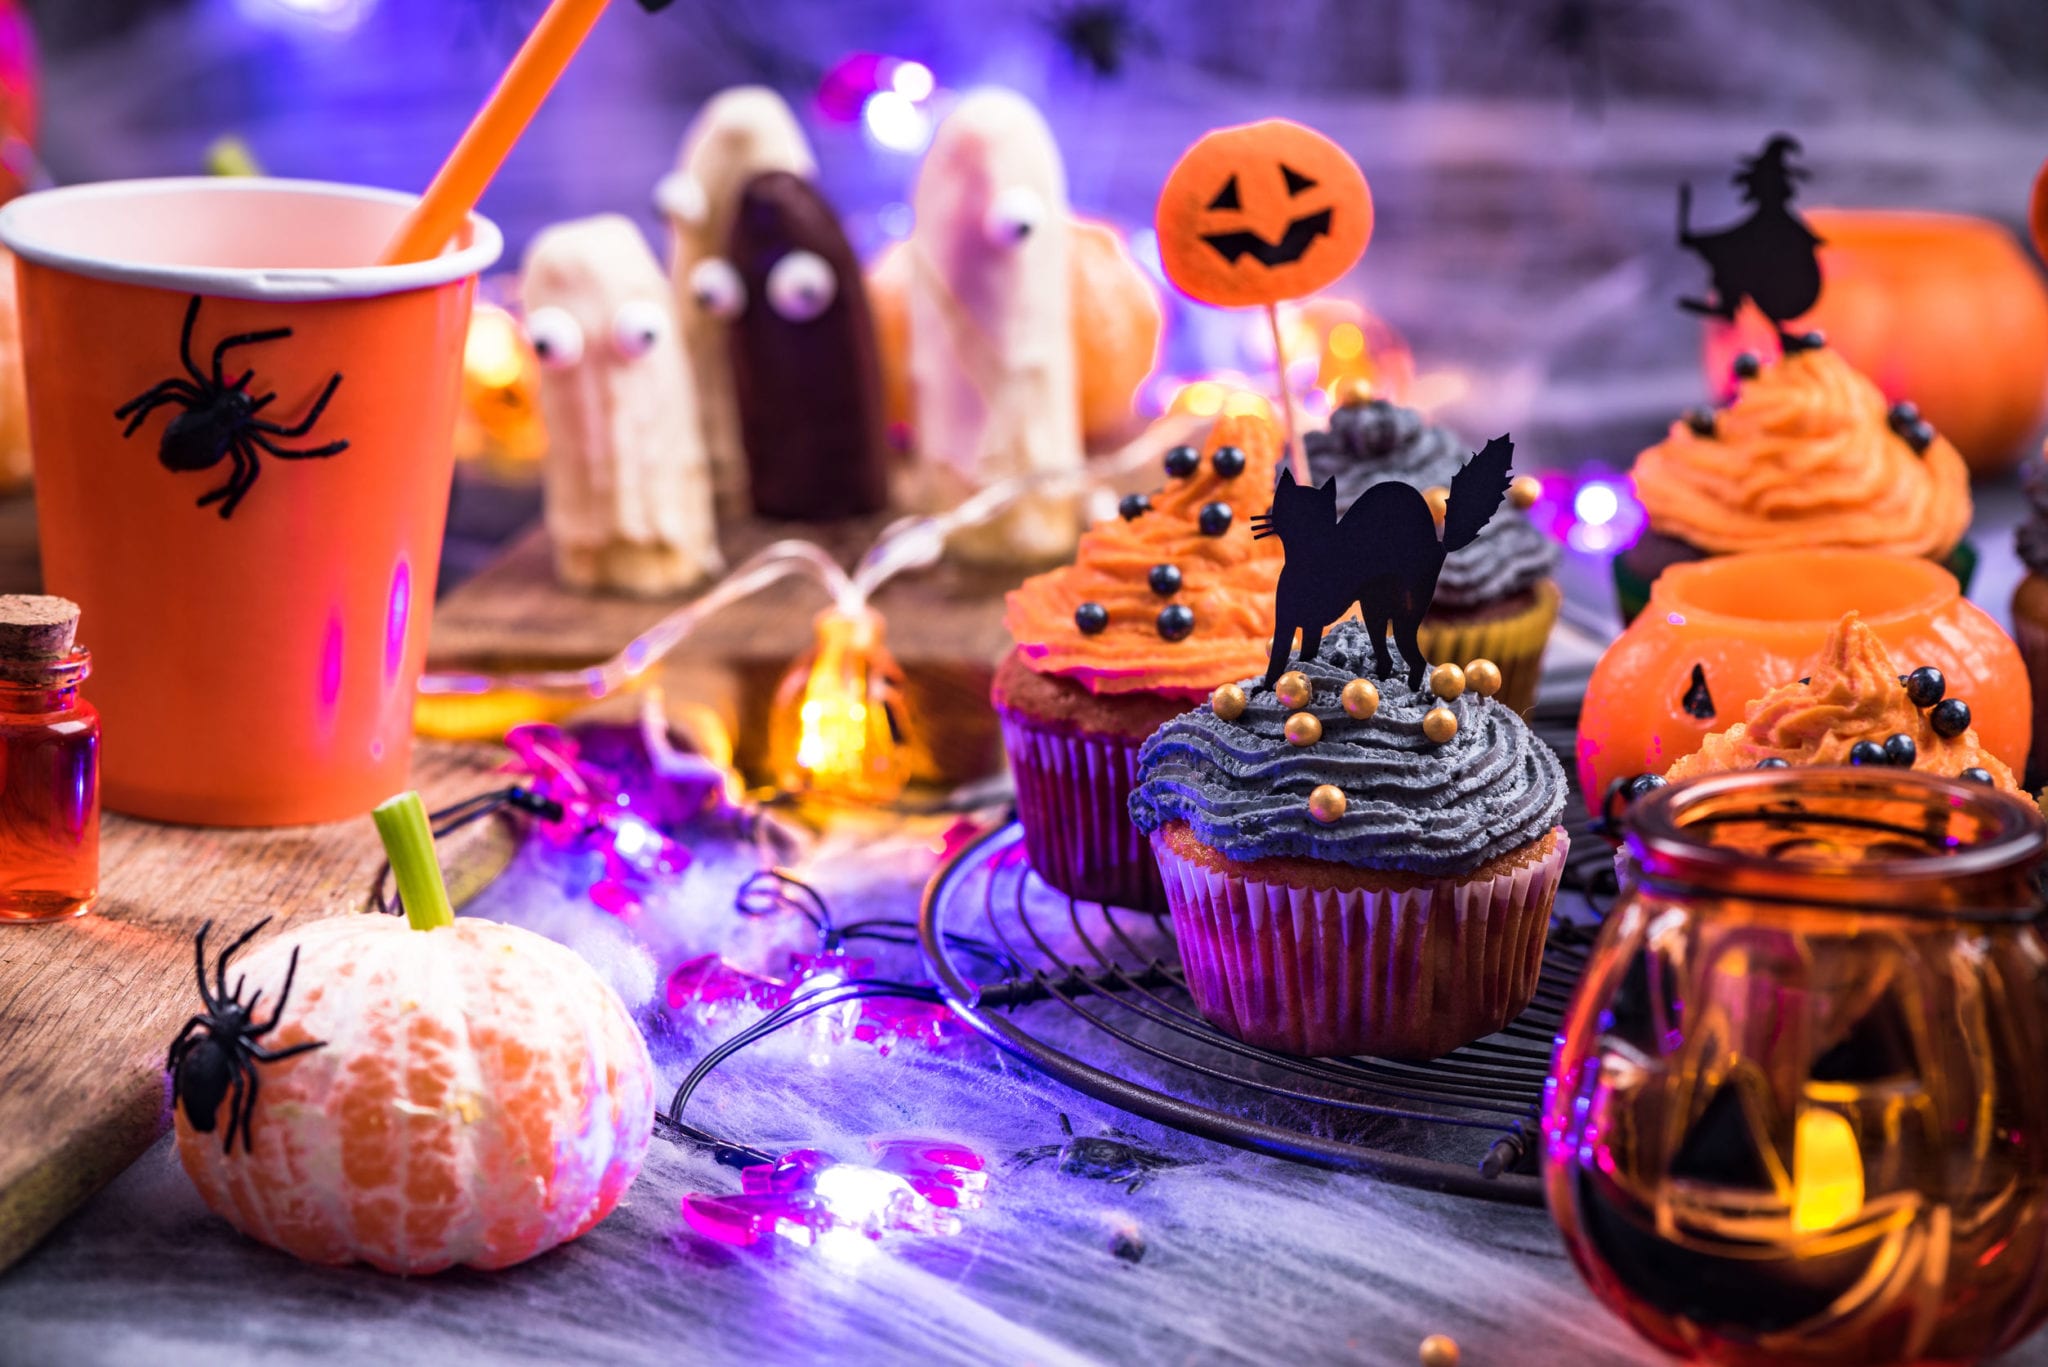 Forget Candy – Halloween Drinking Can Hurt Your Oral Health, Too